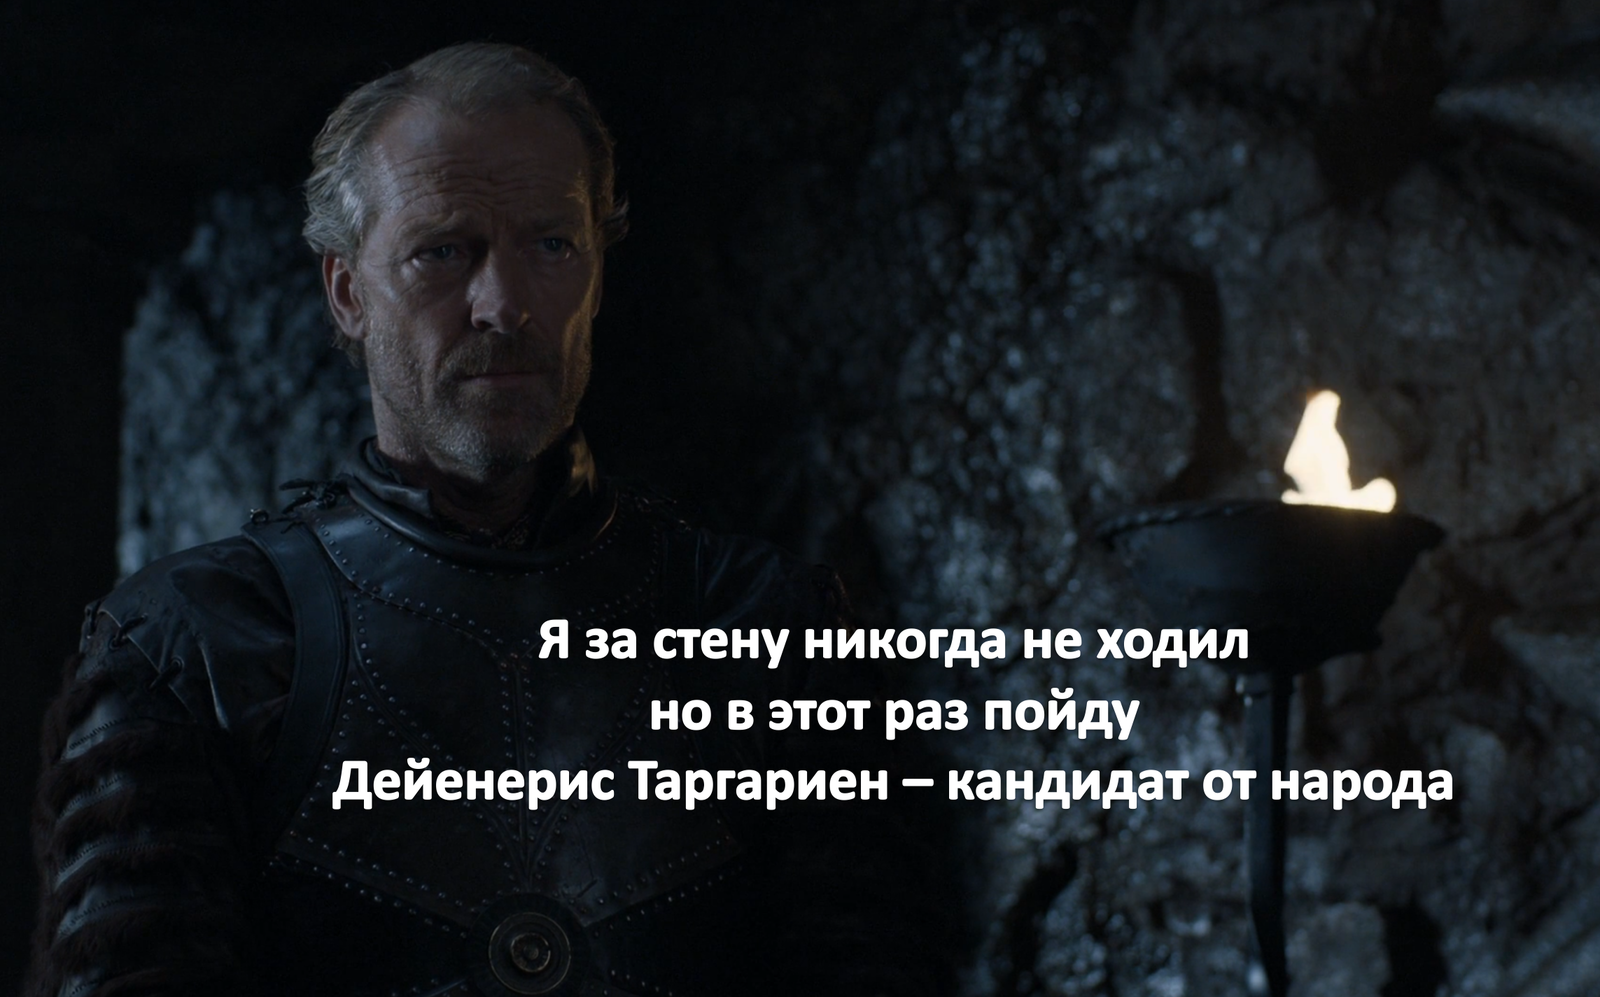 People's candidate - 1994, Game of Thrones, Images, Jorah Mormont